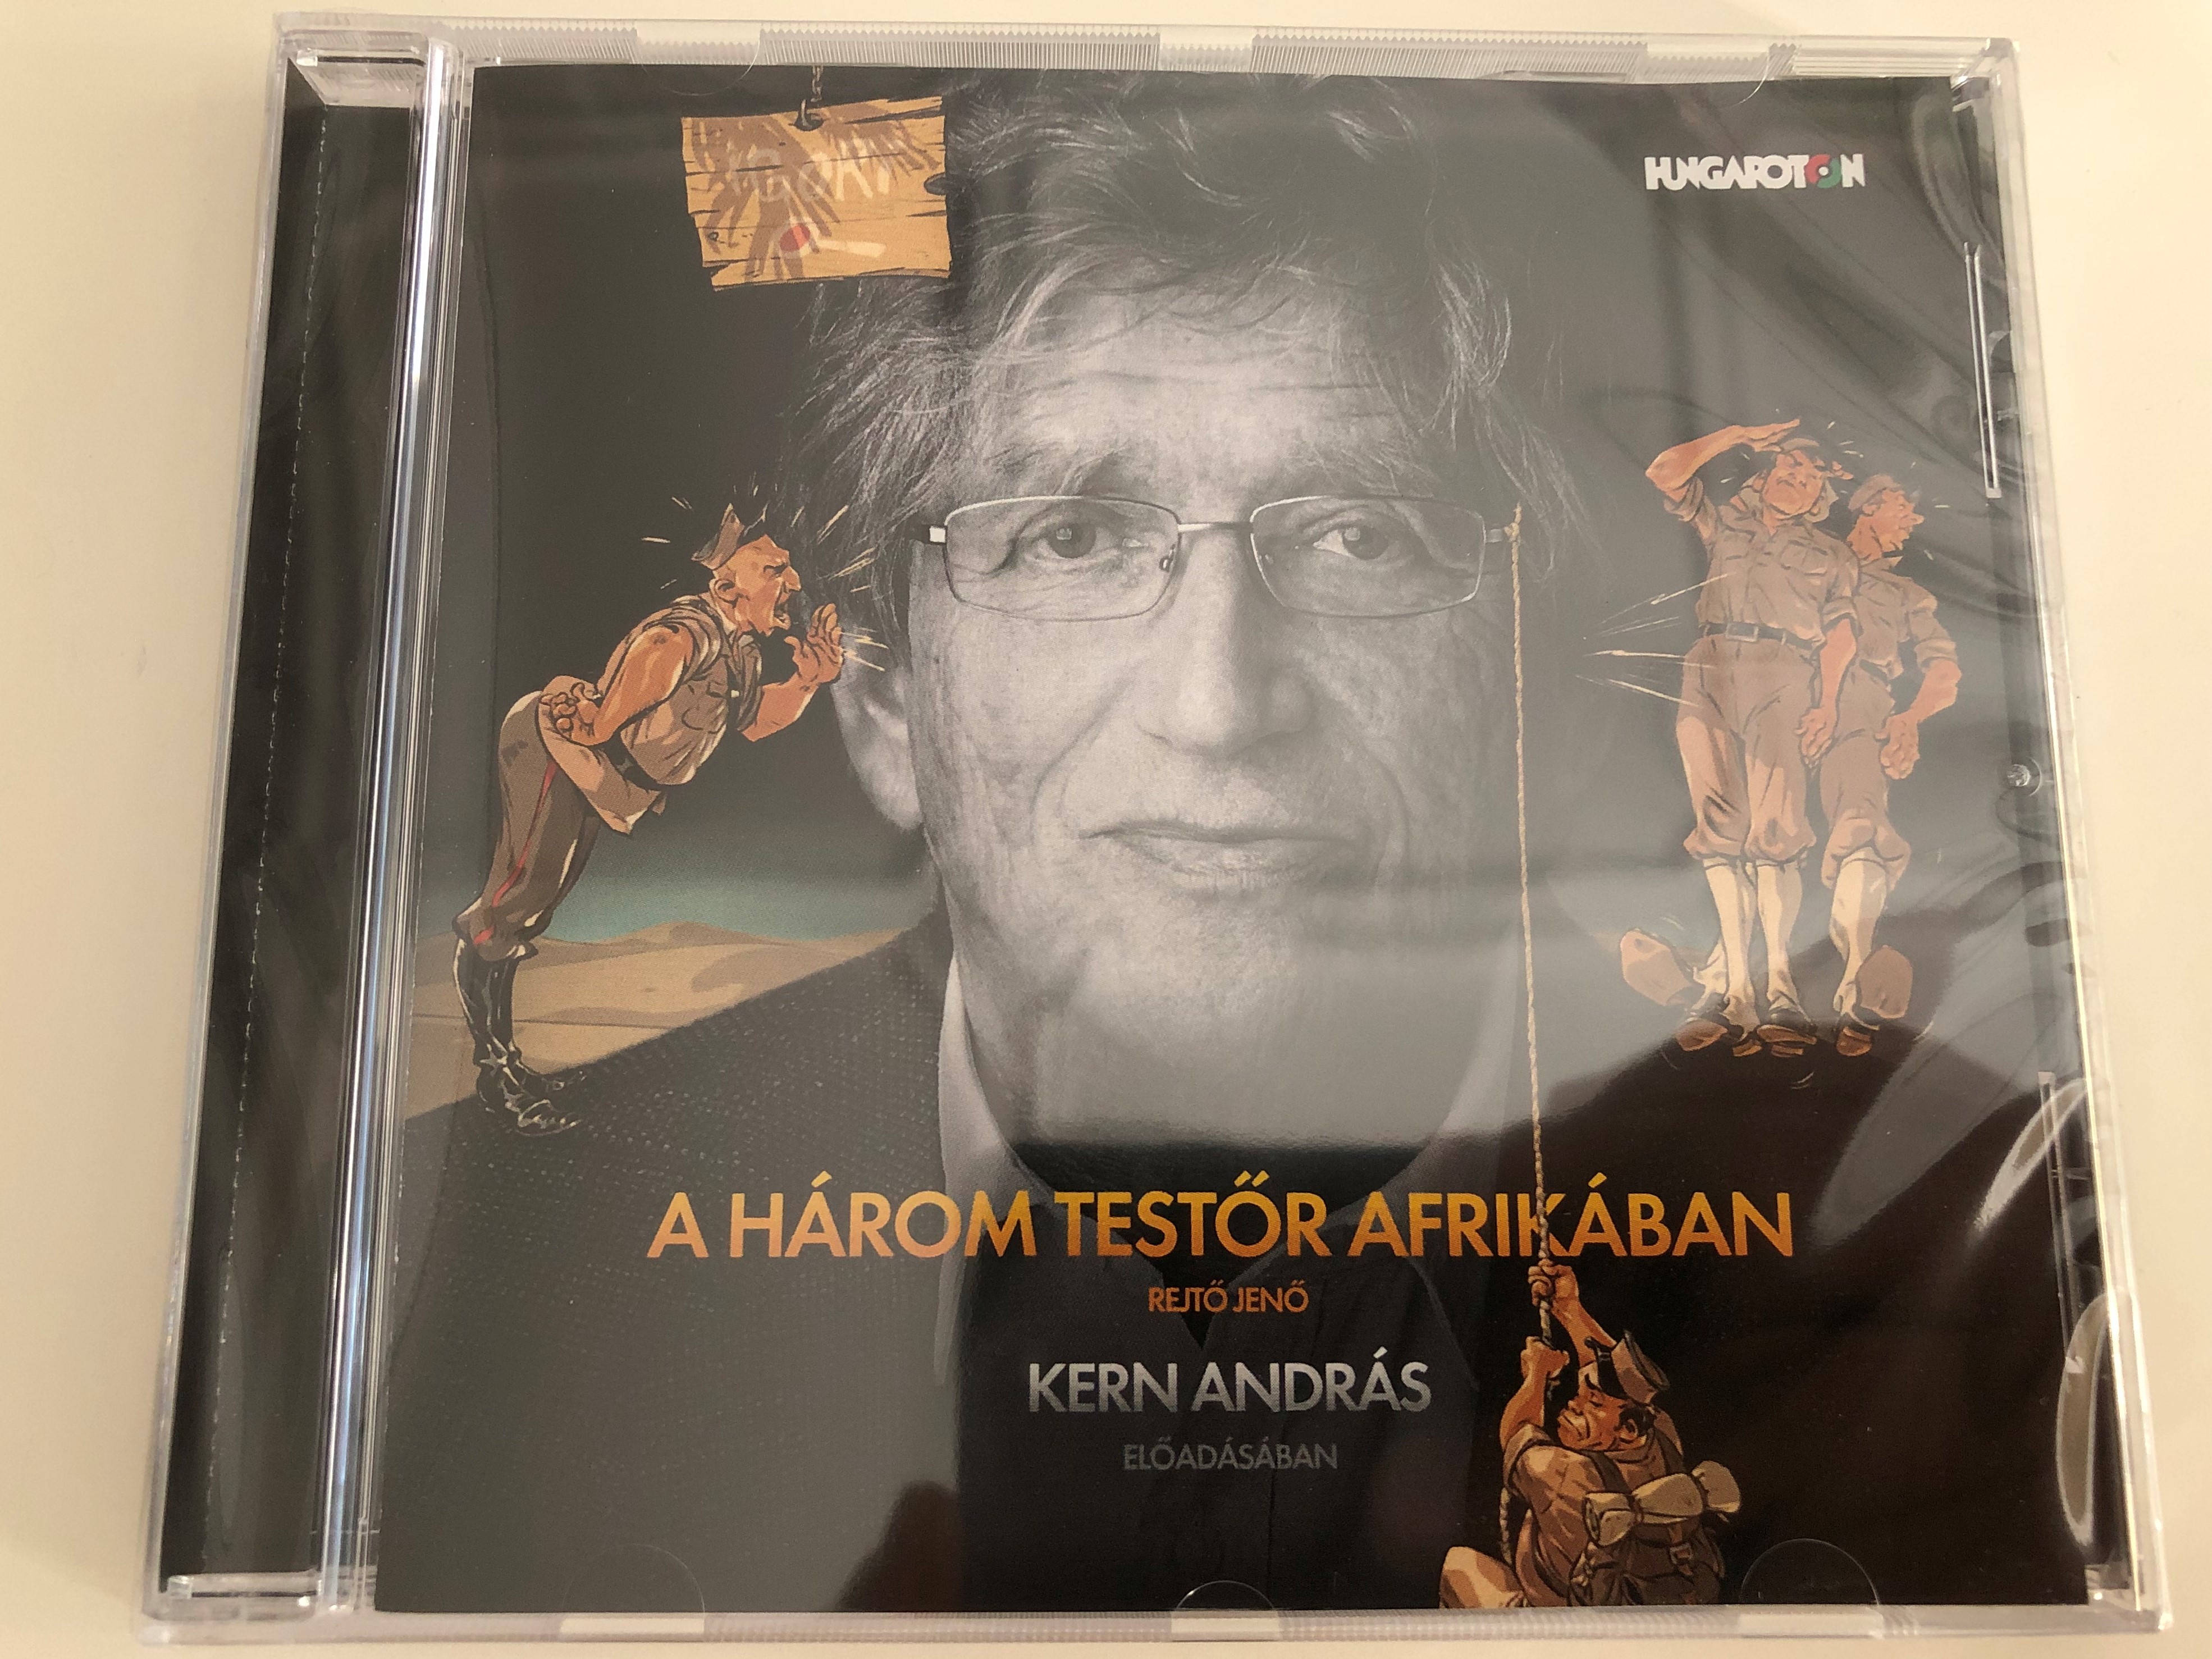 a-h-rom-test-r-afrik-ban-by-rejt-jen-p.-howard-the-three-musketeers-in-africa-audio-book-read-by-kern-andr-s-hungaroton-audio-cd-2017-1-.jpg